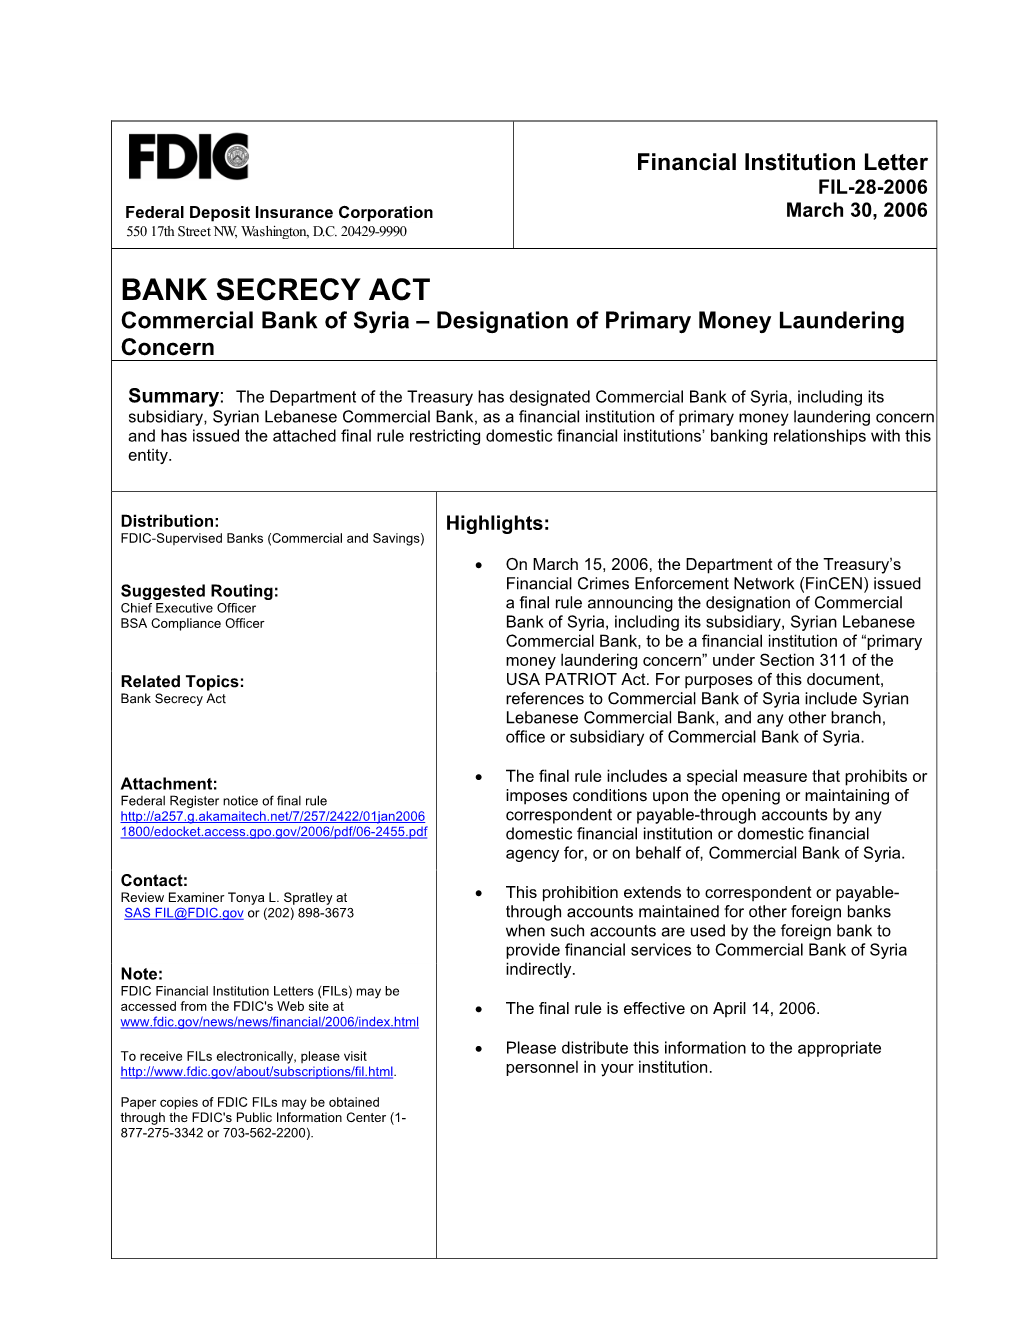 BANK SECRECY ACT Commercial Bank of Syria – Designation of Primary Money Laundering Concern